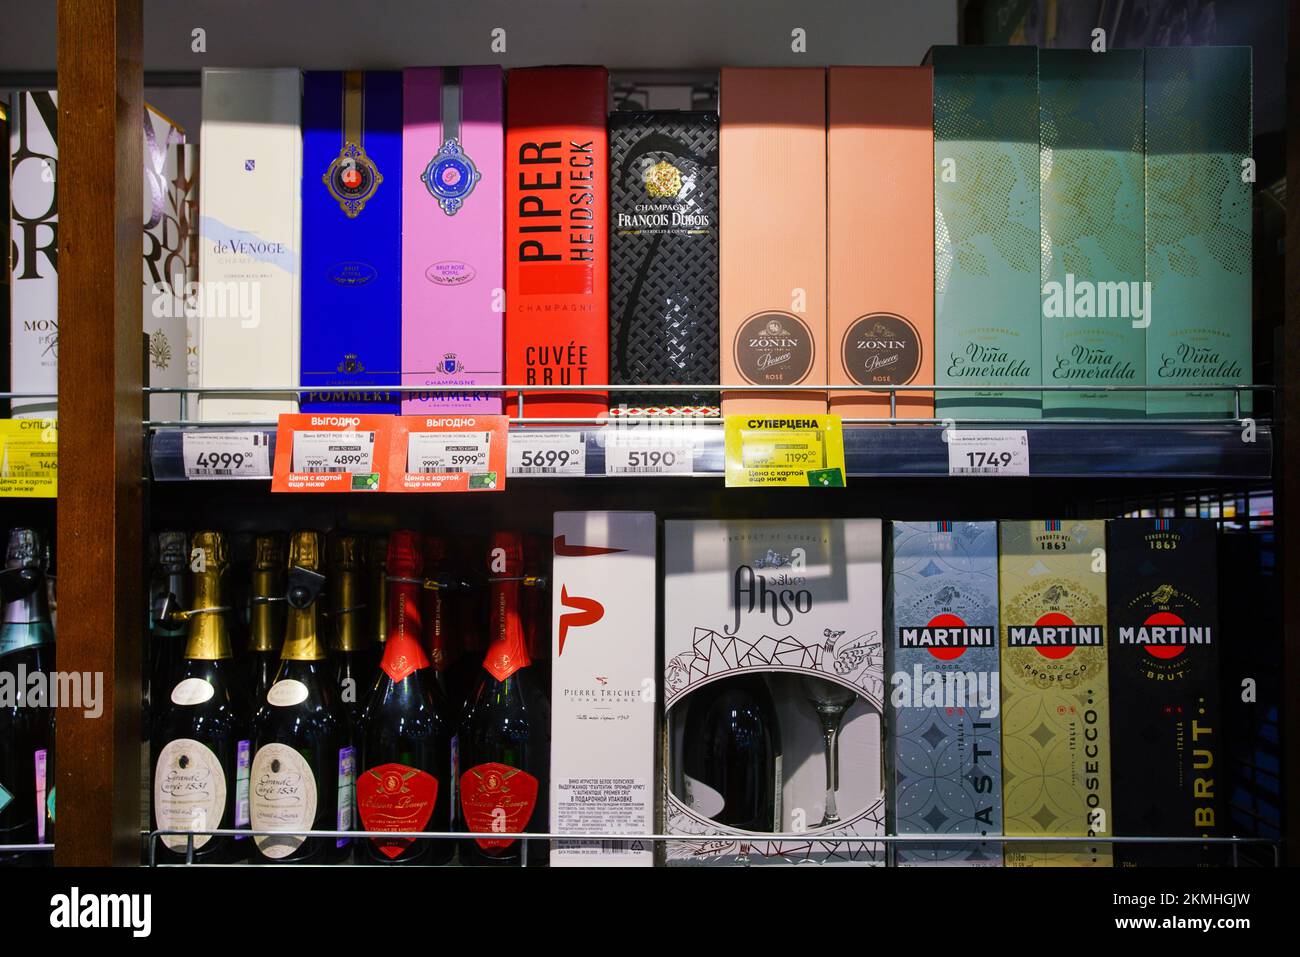 11-23-2022 Moscow , Russia.        French Champagne  bottles  in moscow Store -  not  famous  but  ' Piper Heidsieck' 'Pommery' , 'de Venoge' Stock Photo